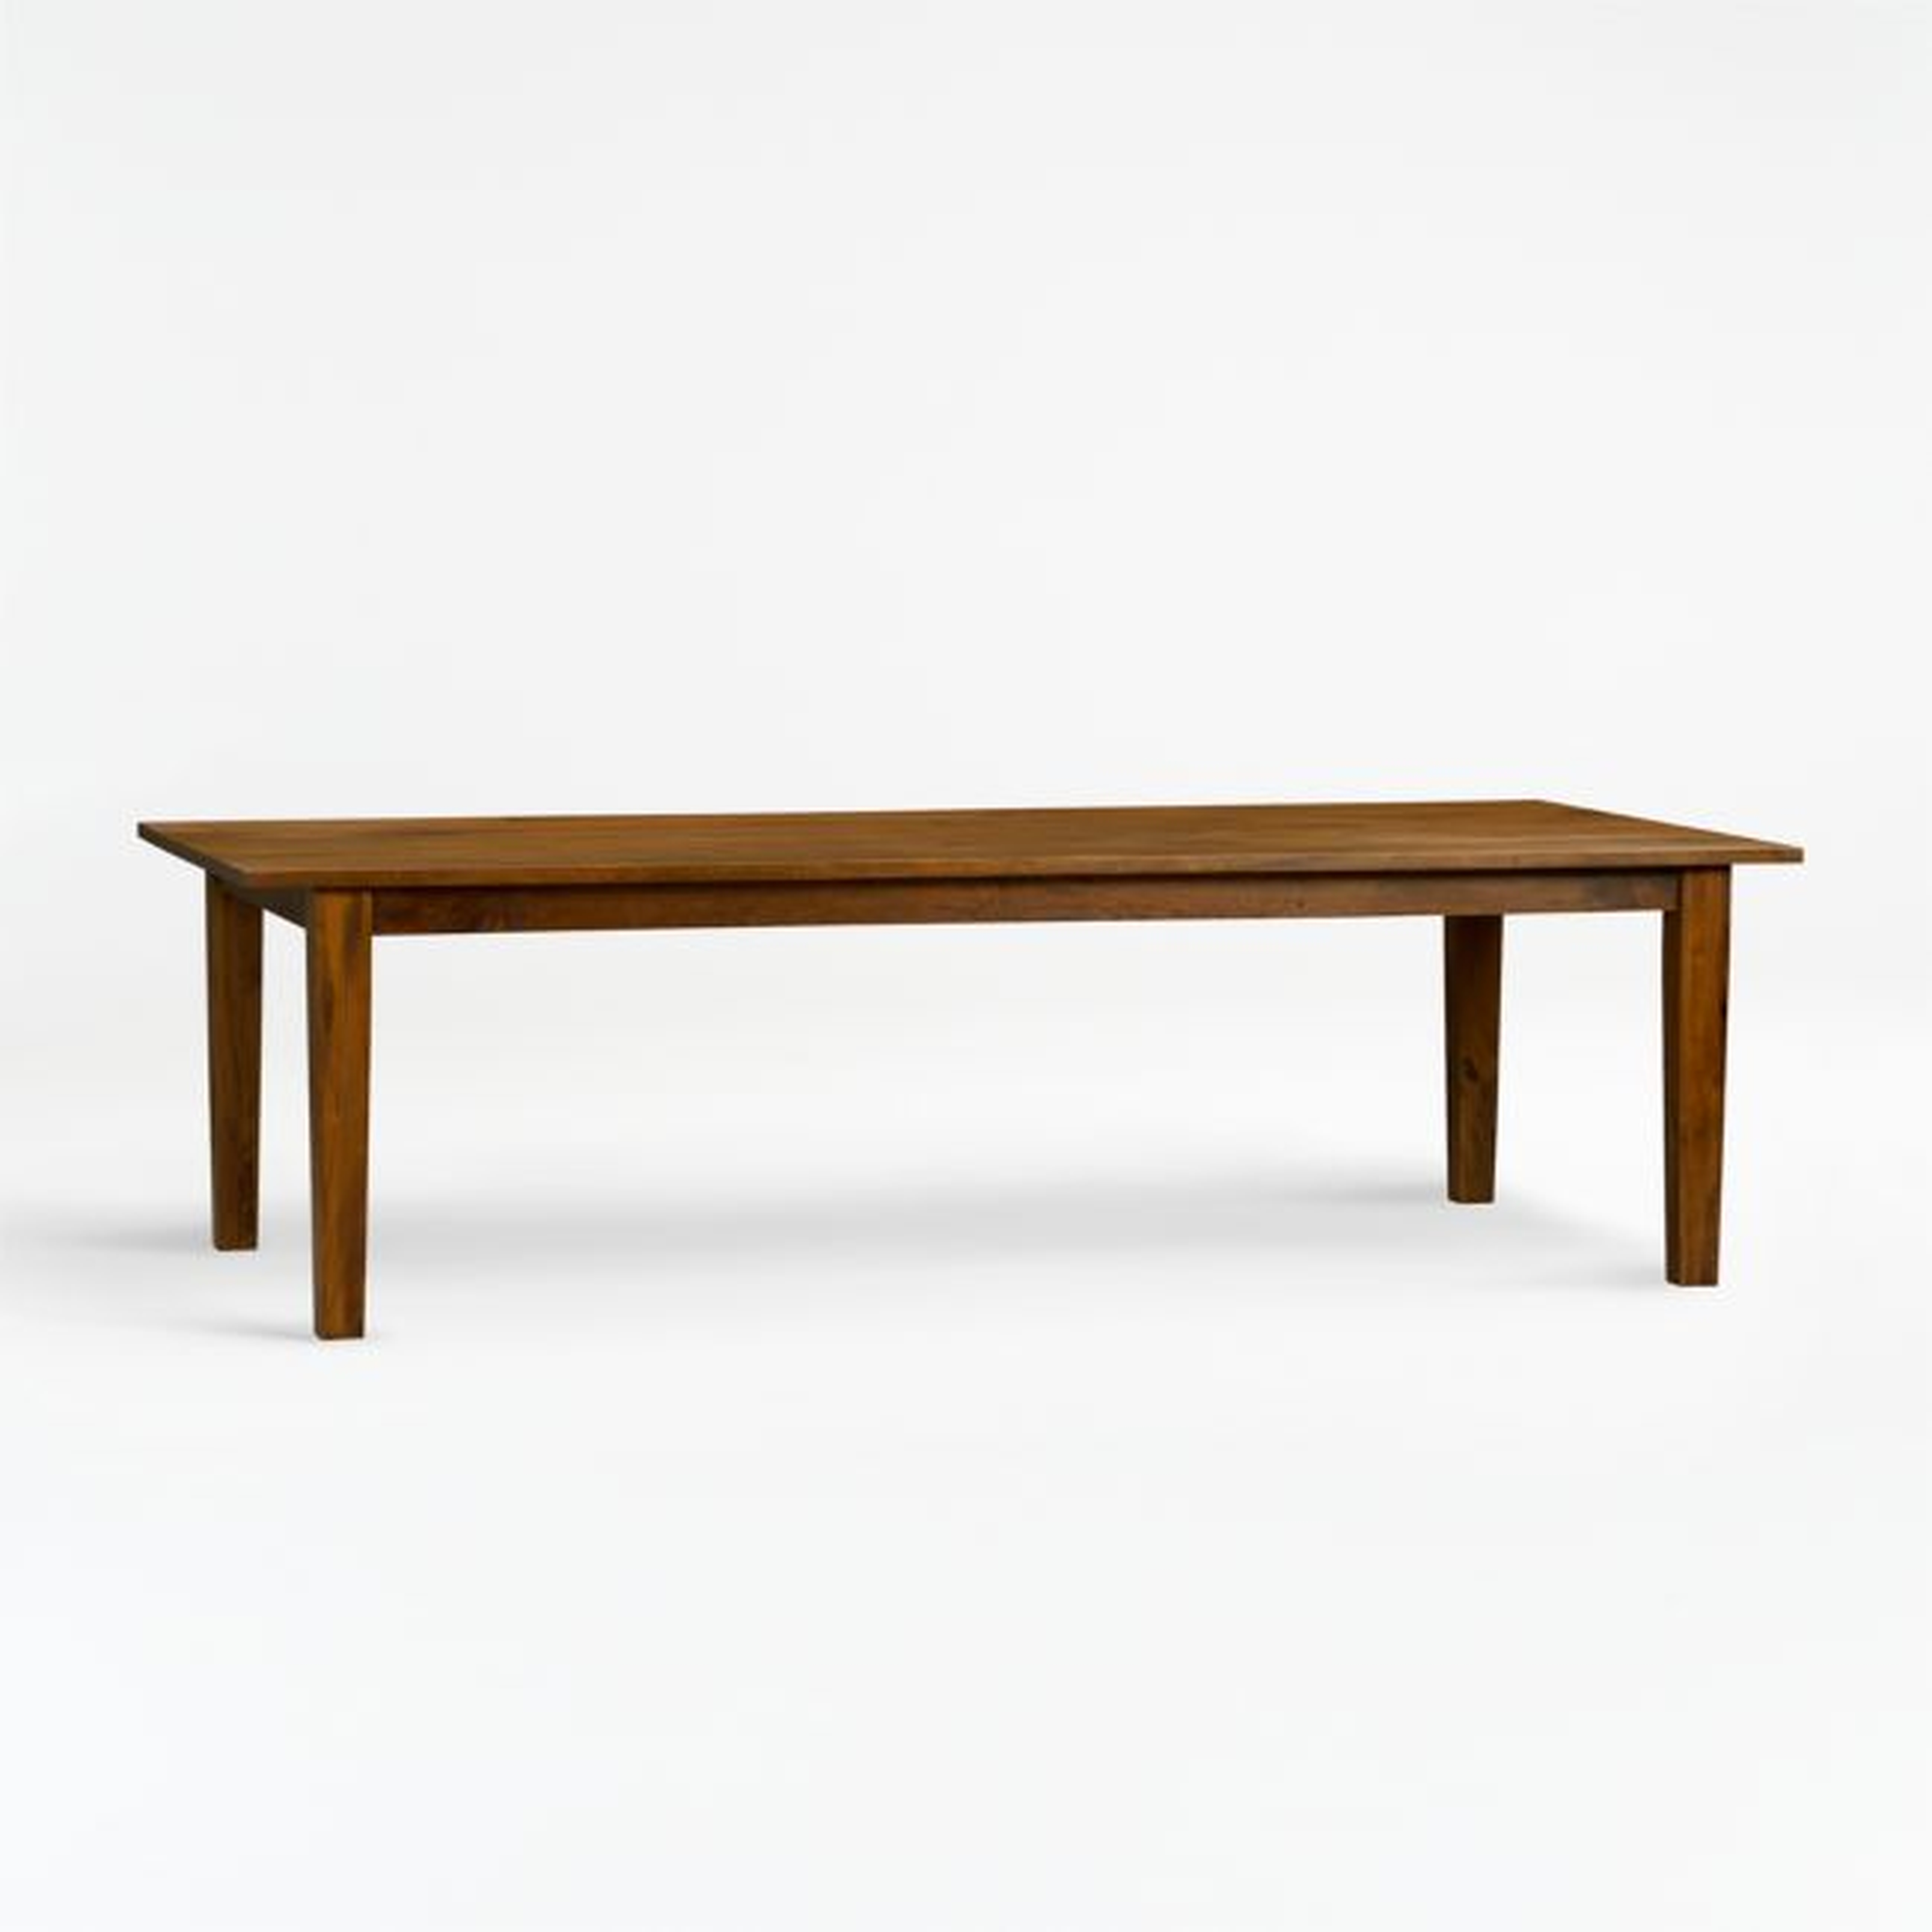 Basque 104" Honey Brown Solid Wood Dining Table - Crate and Barrel